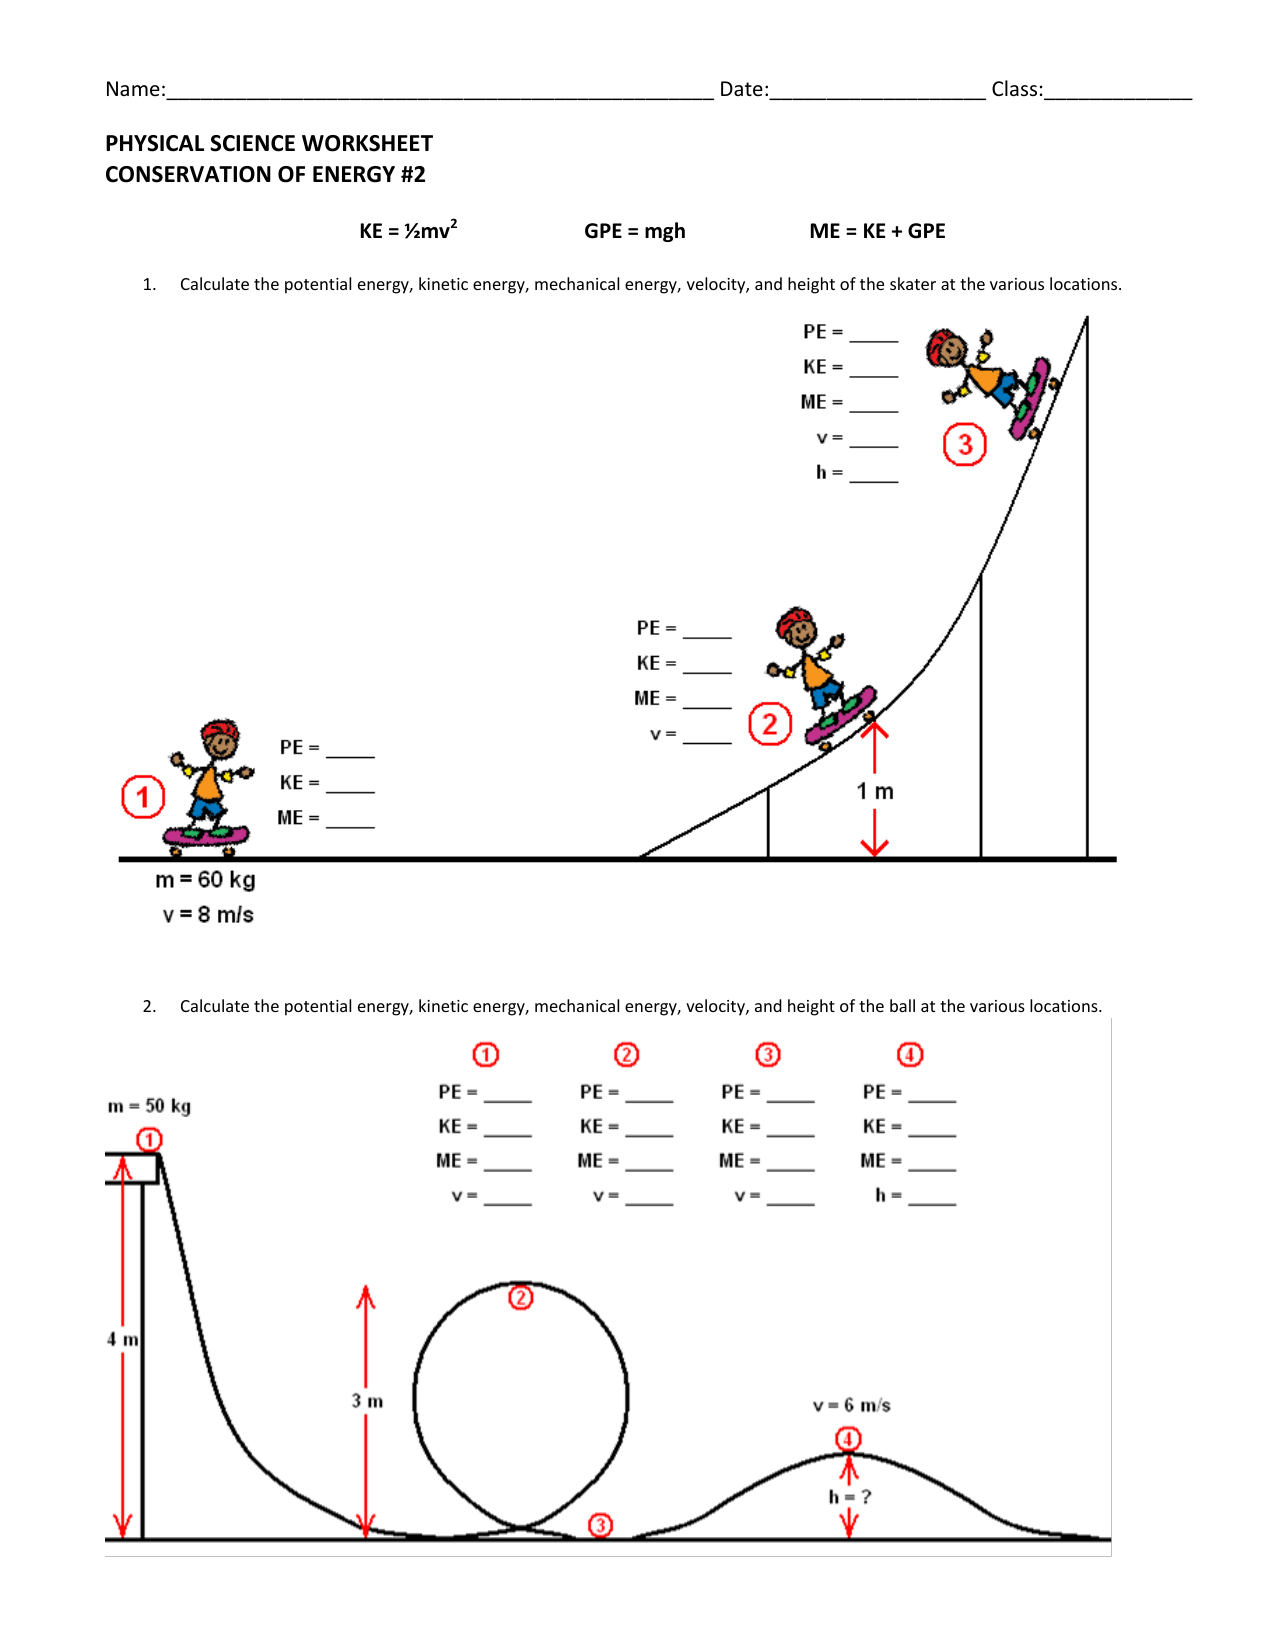 Conservation Of Energy Dragged Throughout Physical Science Worksheet Conservation Of Energy 2